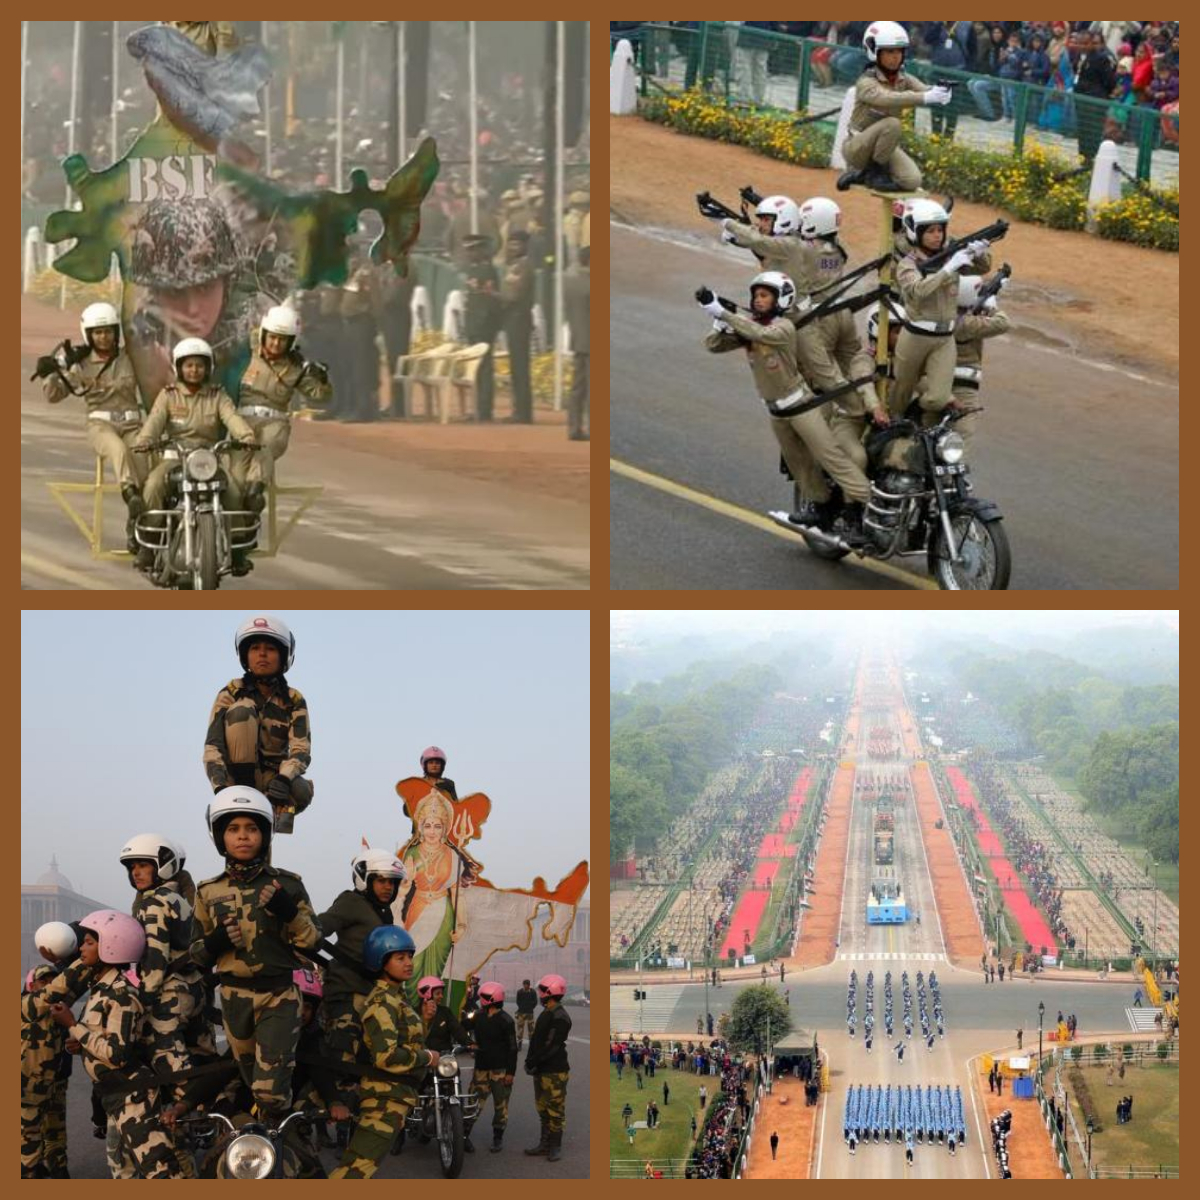 BSF's women daredevils debut at R-Day parade